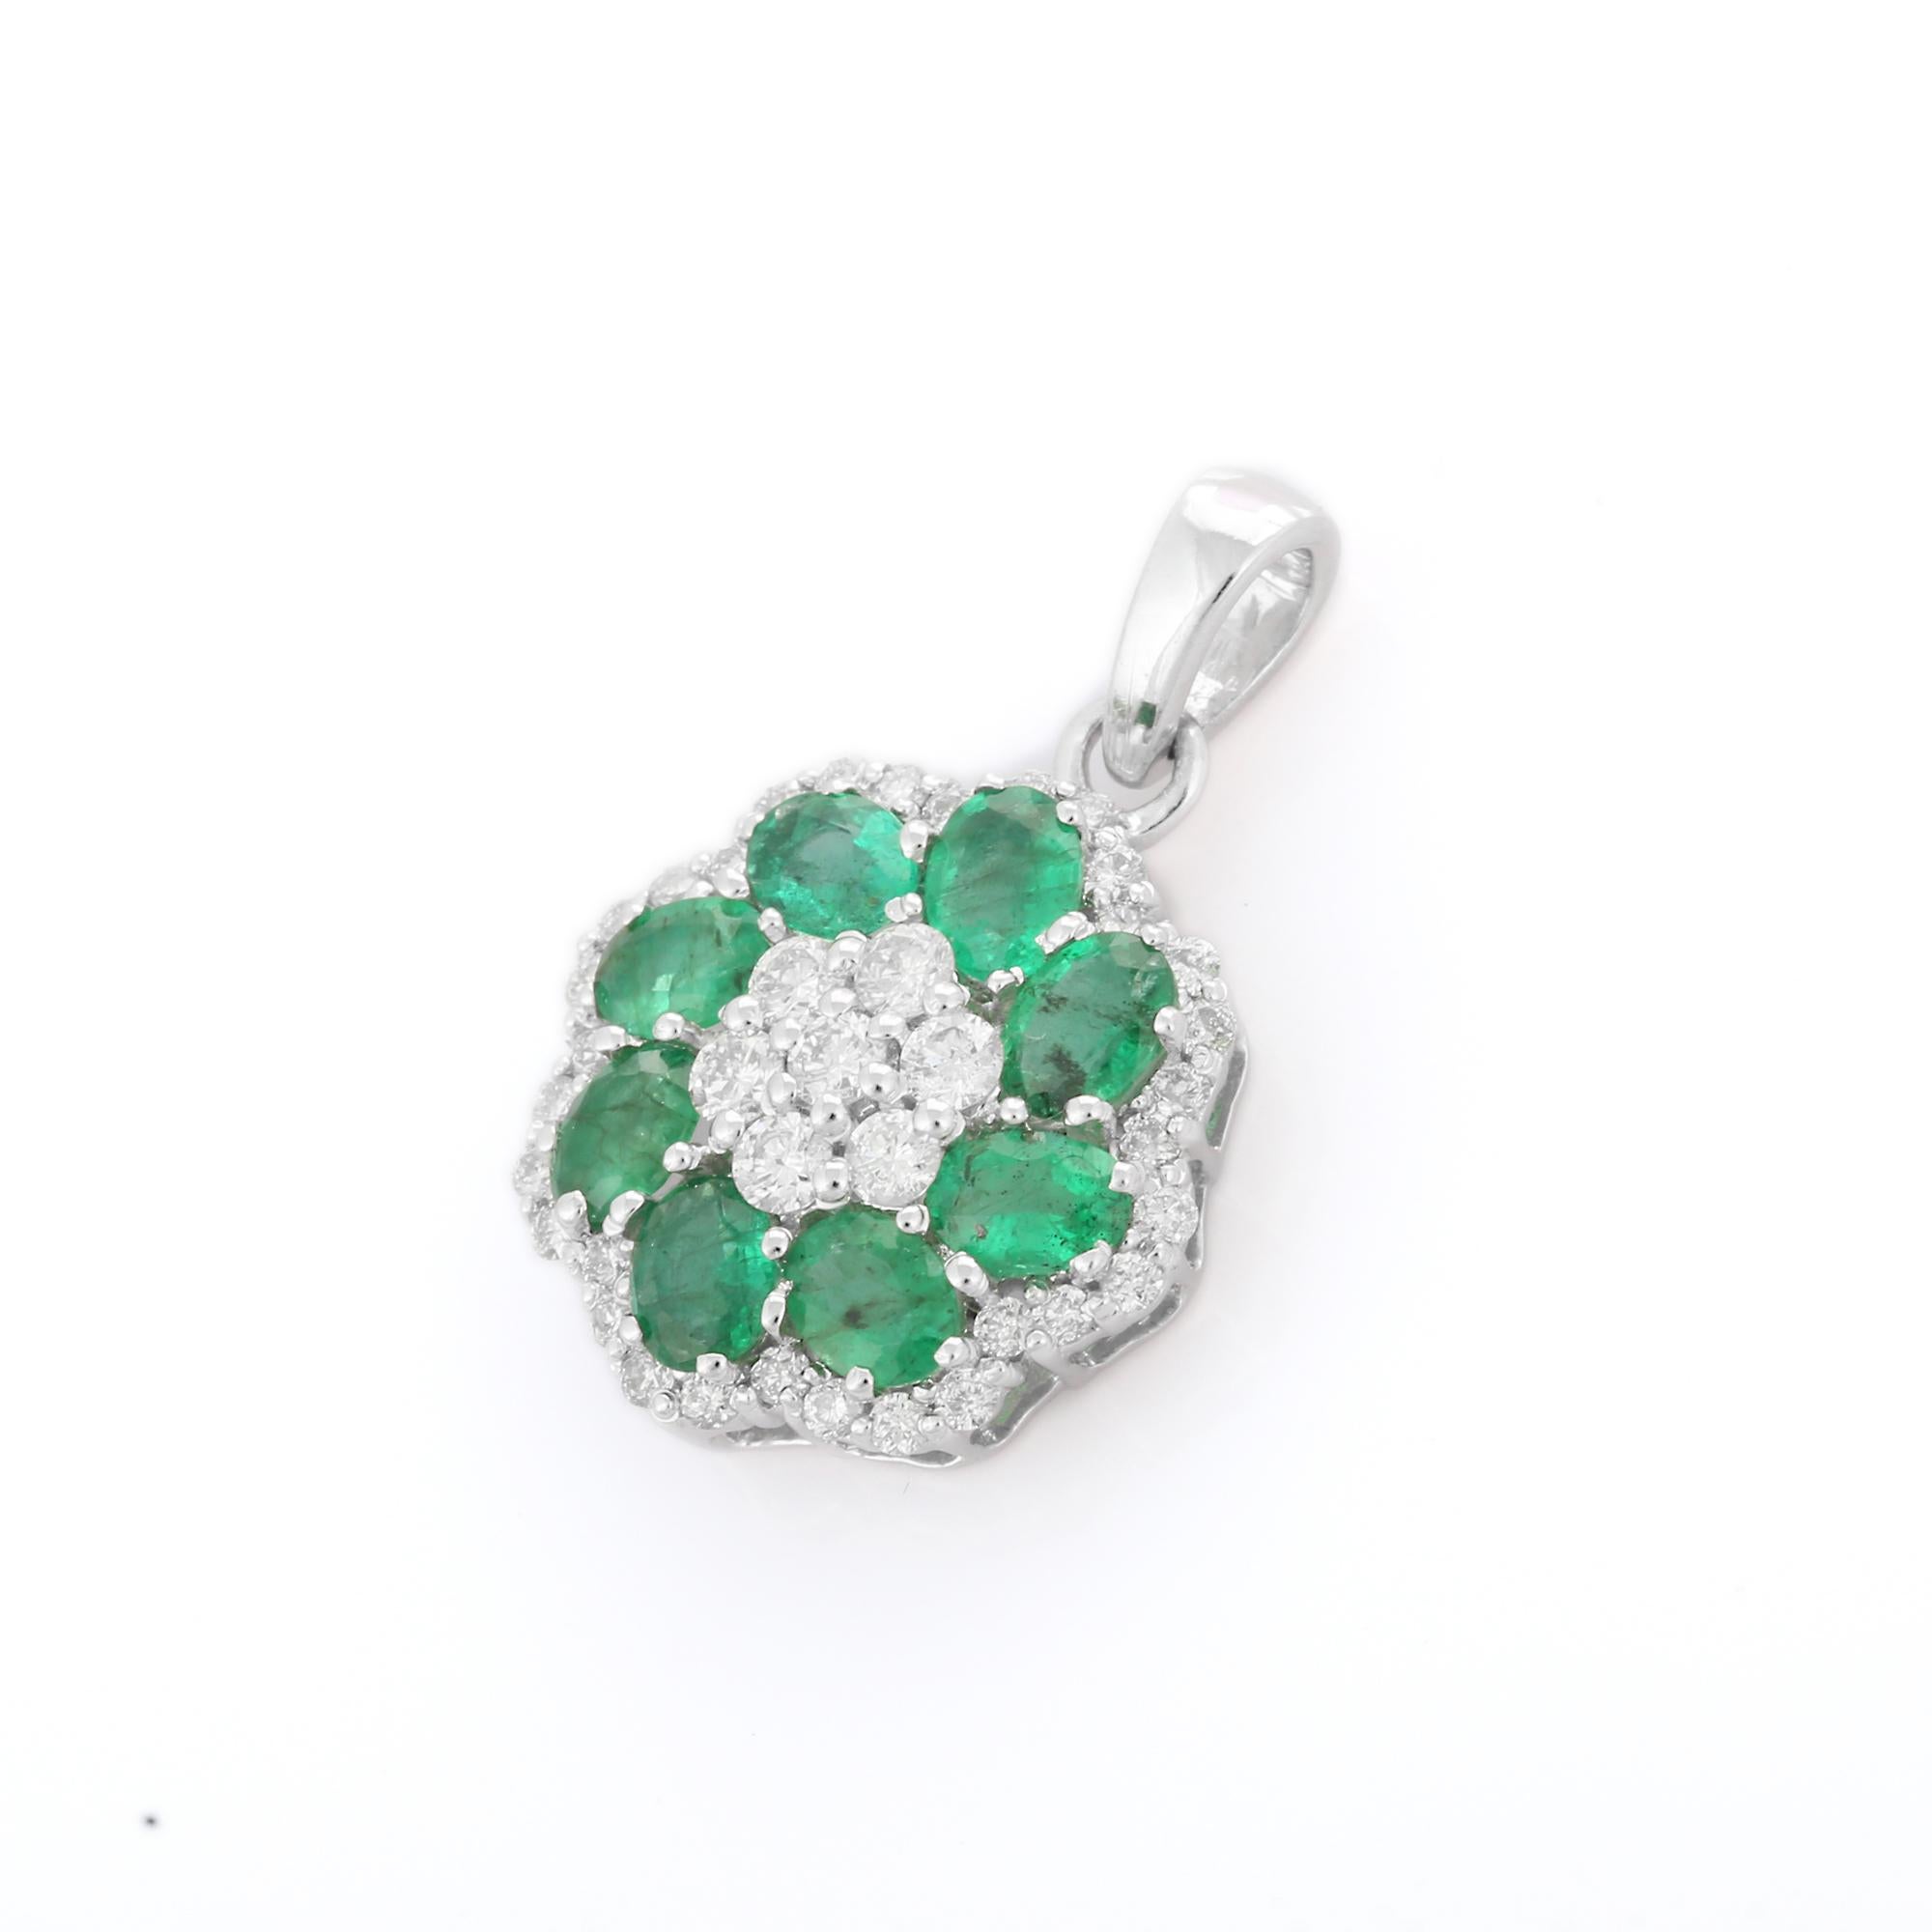 Natural Floral Emerald pendant in 18K Gold. It has a oval cut emerald studded with diamonds that completes your look with a decent touch. Pendants are used to wear or gifted to represent love and promises. It's an attractive jewelry piece that goes